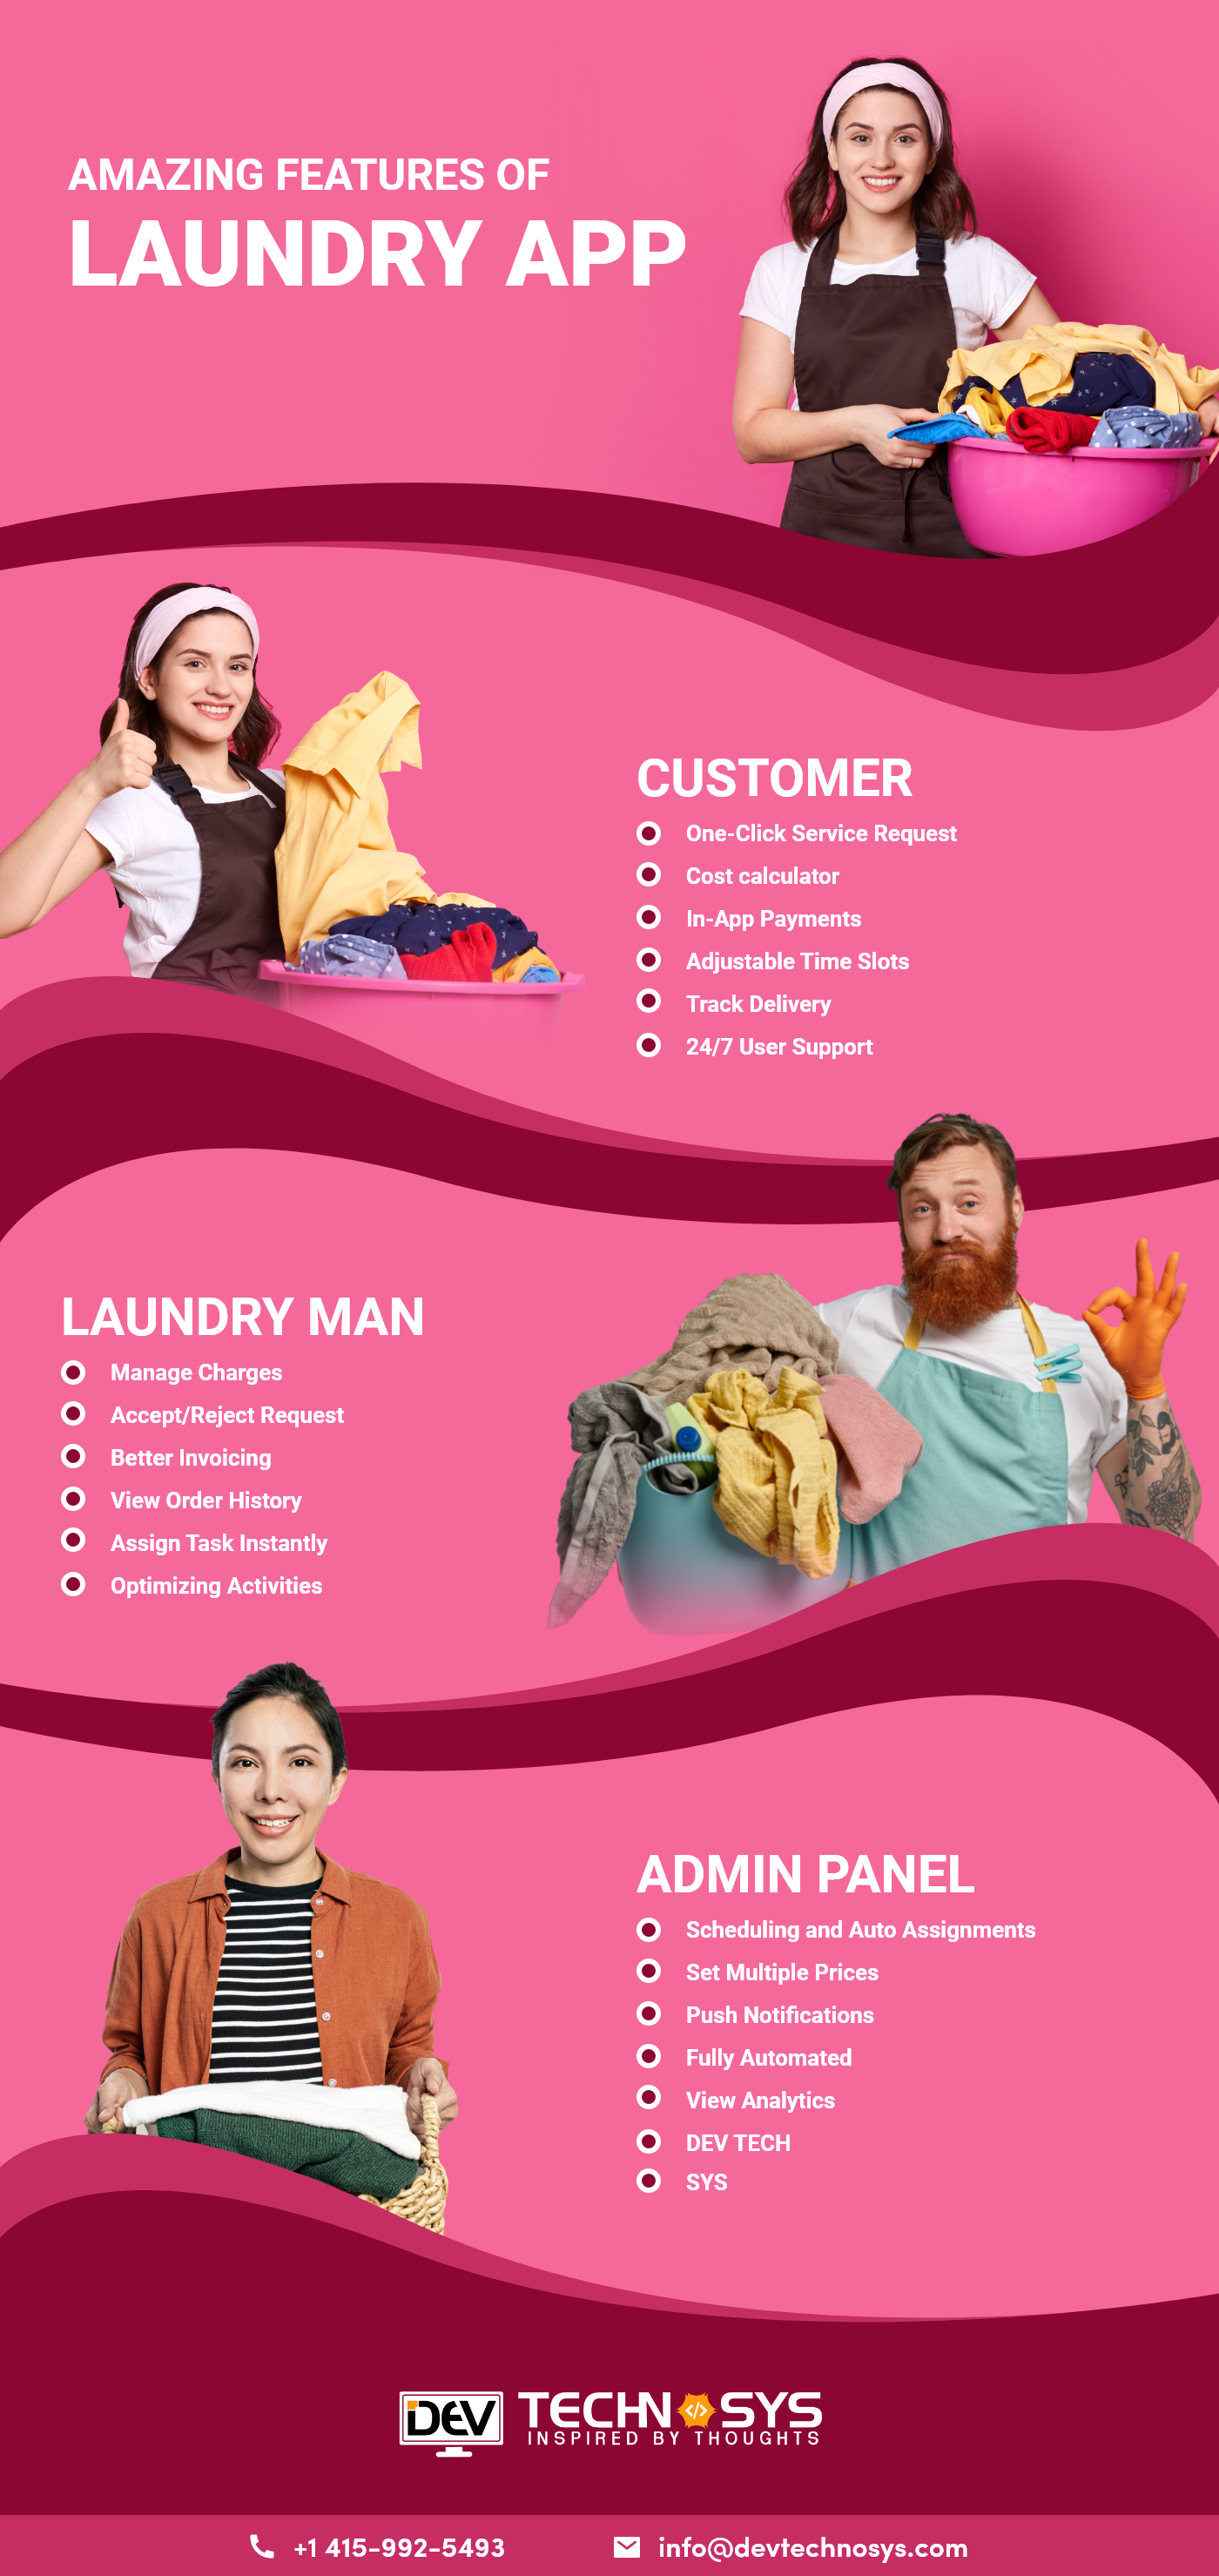 Features of Laundry Apps